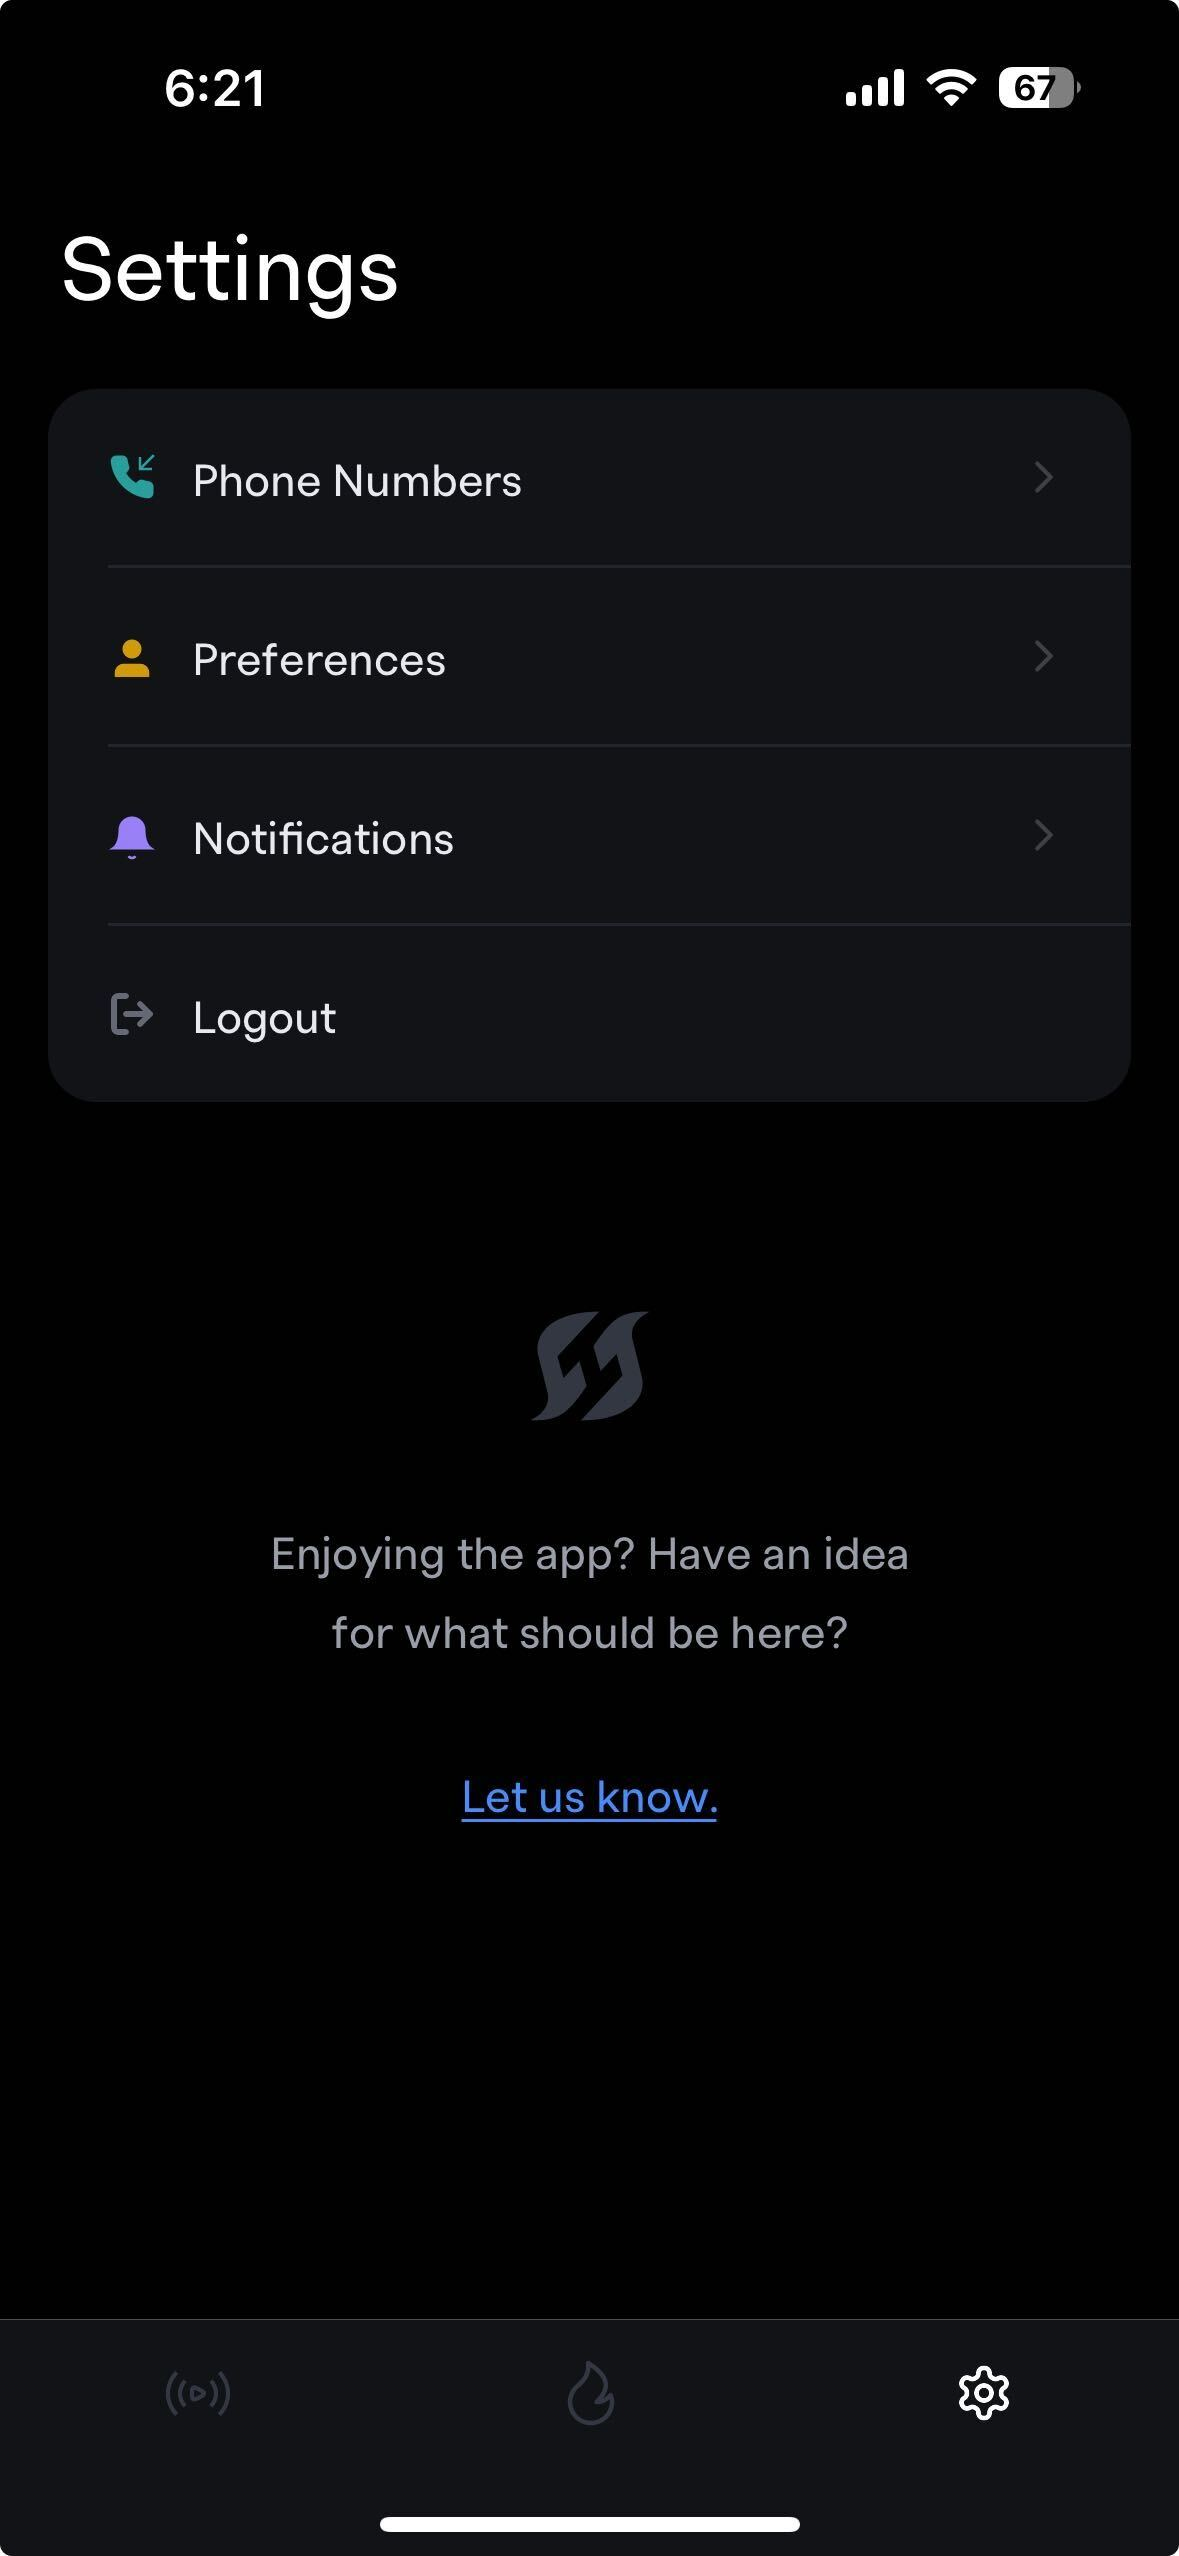 Notification settings in the mobile app